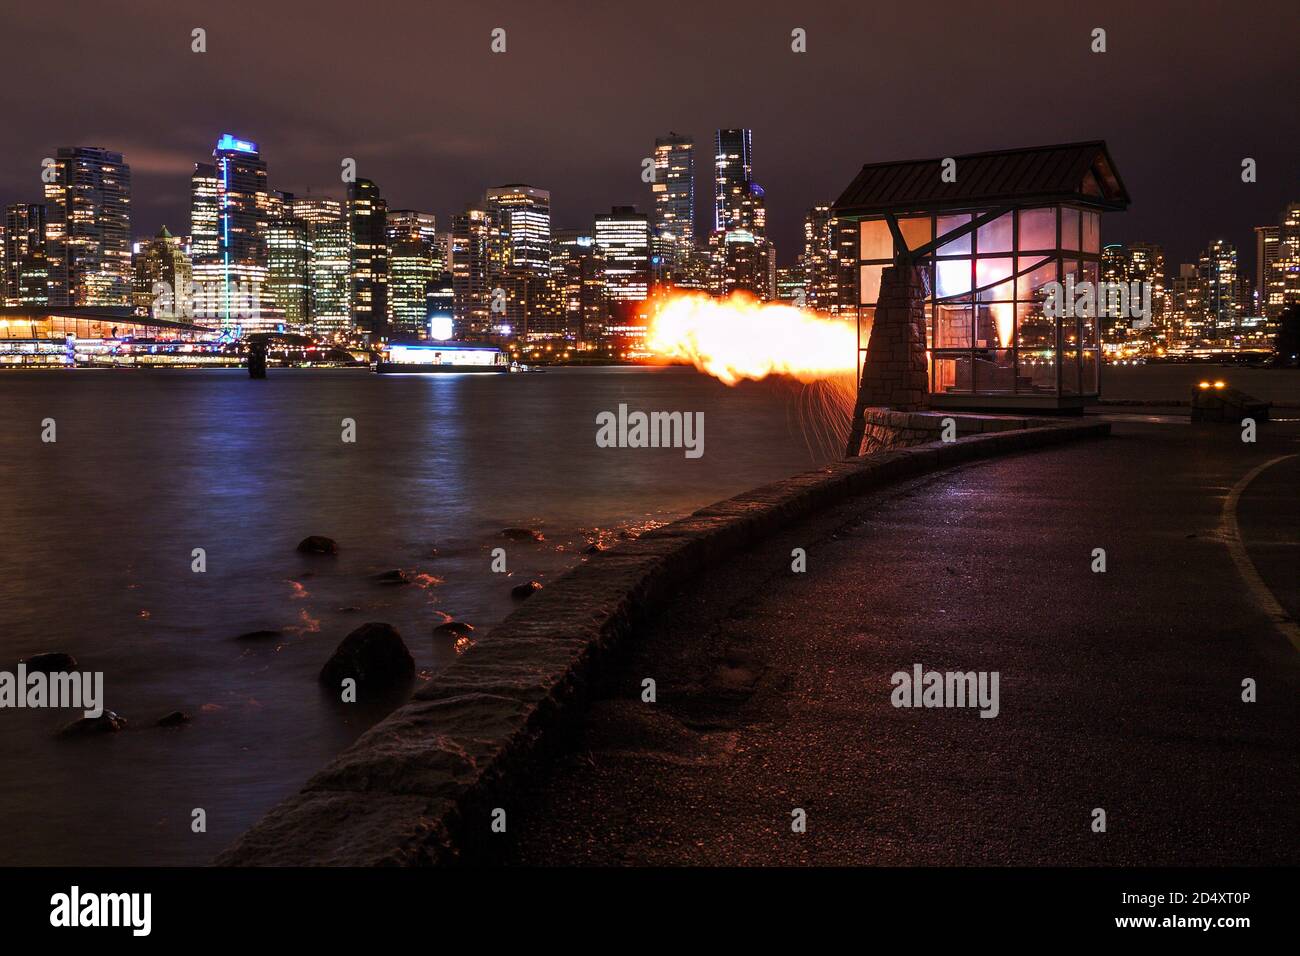 Vancouver 9 O'Clock Gun shooting in dark with cityscape in the background. Stock Photo